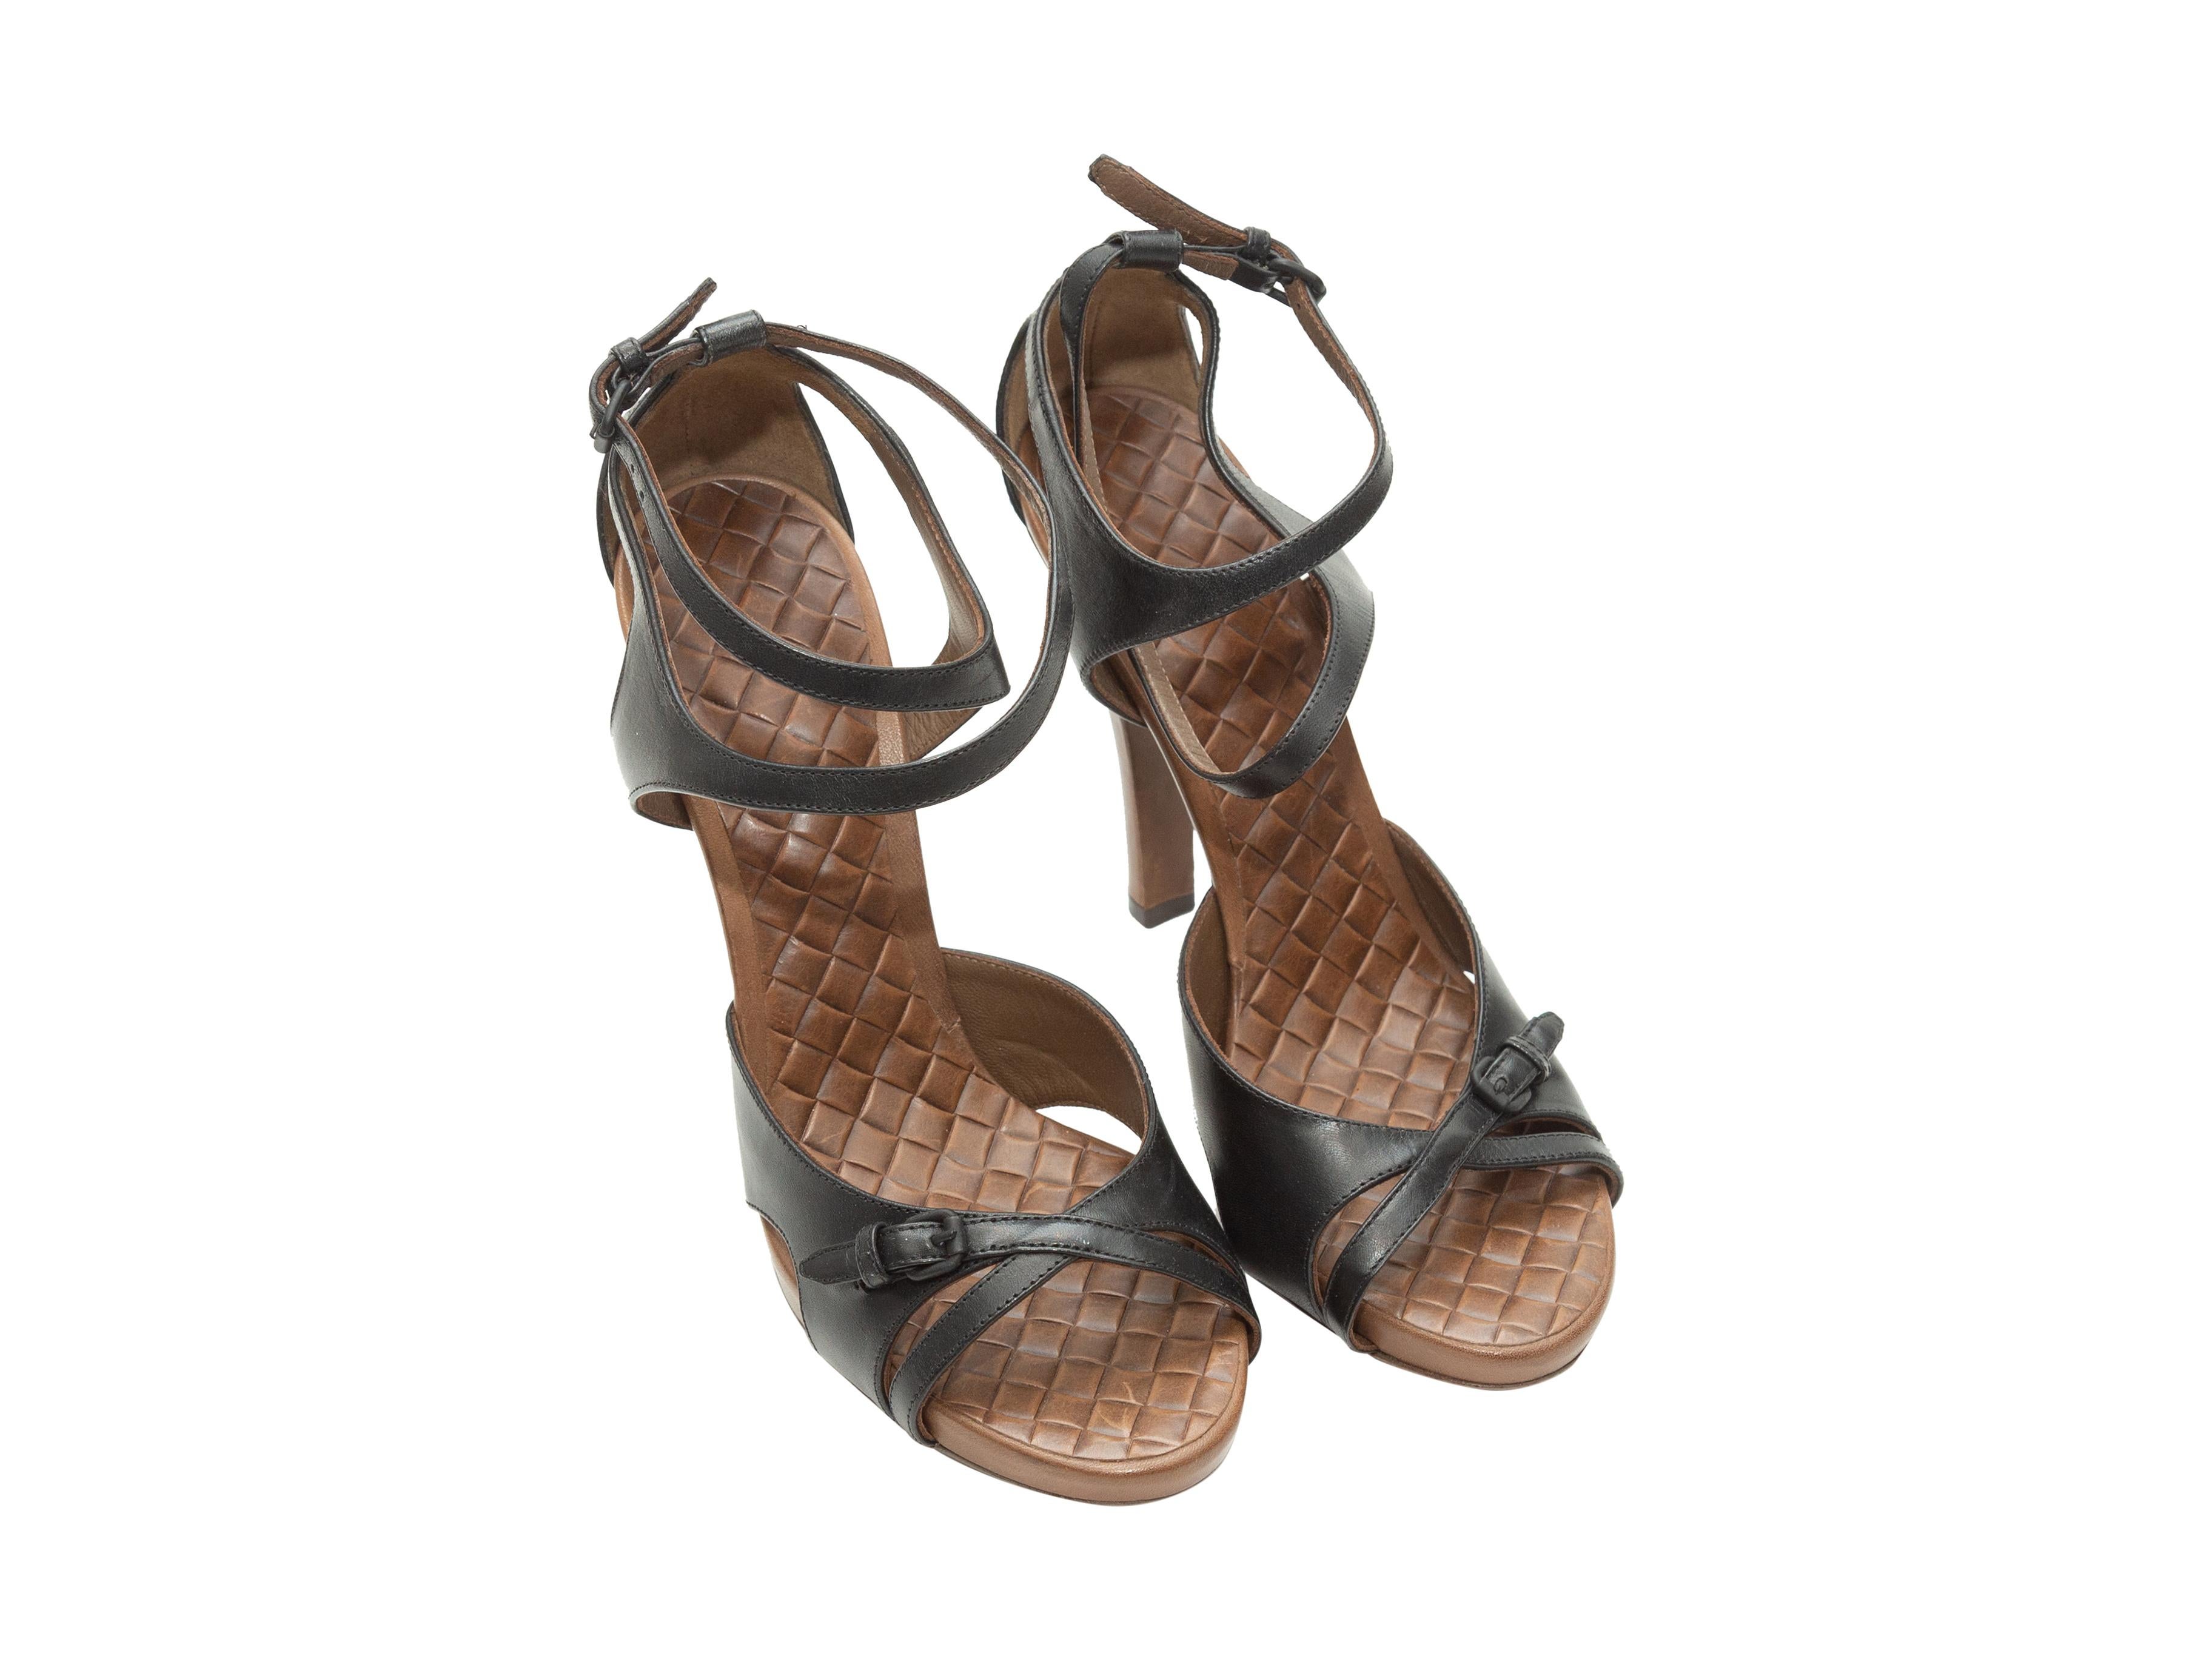 Product details: Black leather heeled sandals by Bottega Veneta. Intrecciatio insoles. Brown covered leather heels. Buckle closures at ankle straps. Designer size 39. 4.5